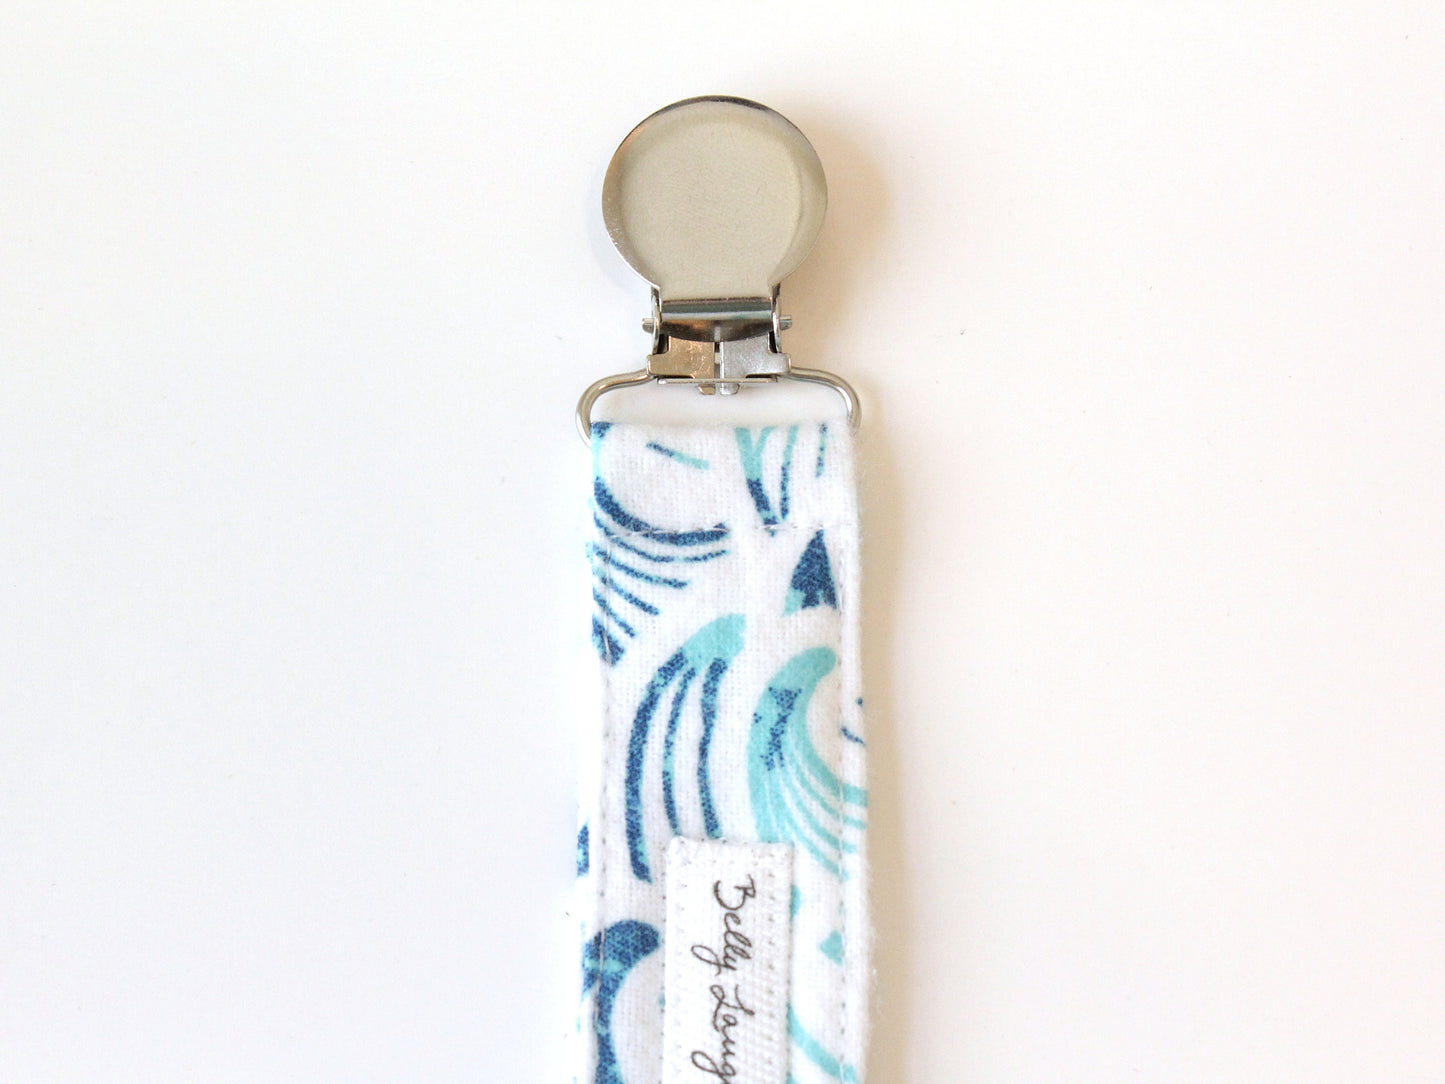 Ocean Waves Flannel Pacifier Clip Gender Neutral | Baby Gift | Soother Leash Binky Holder | CPSC Compliant